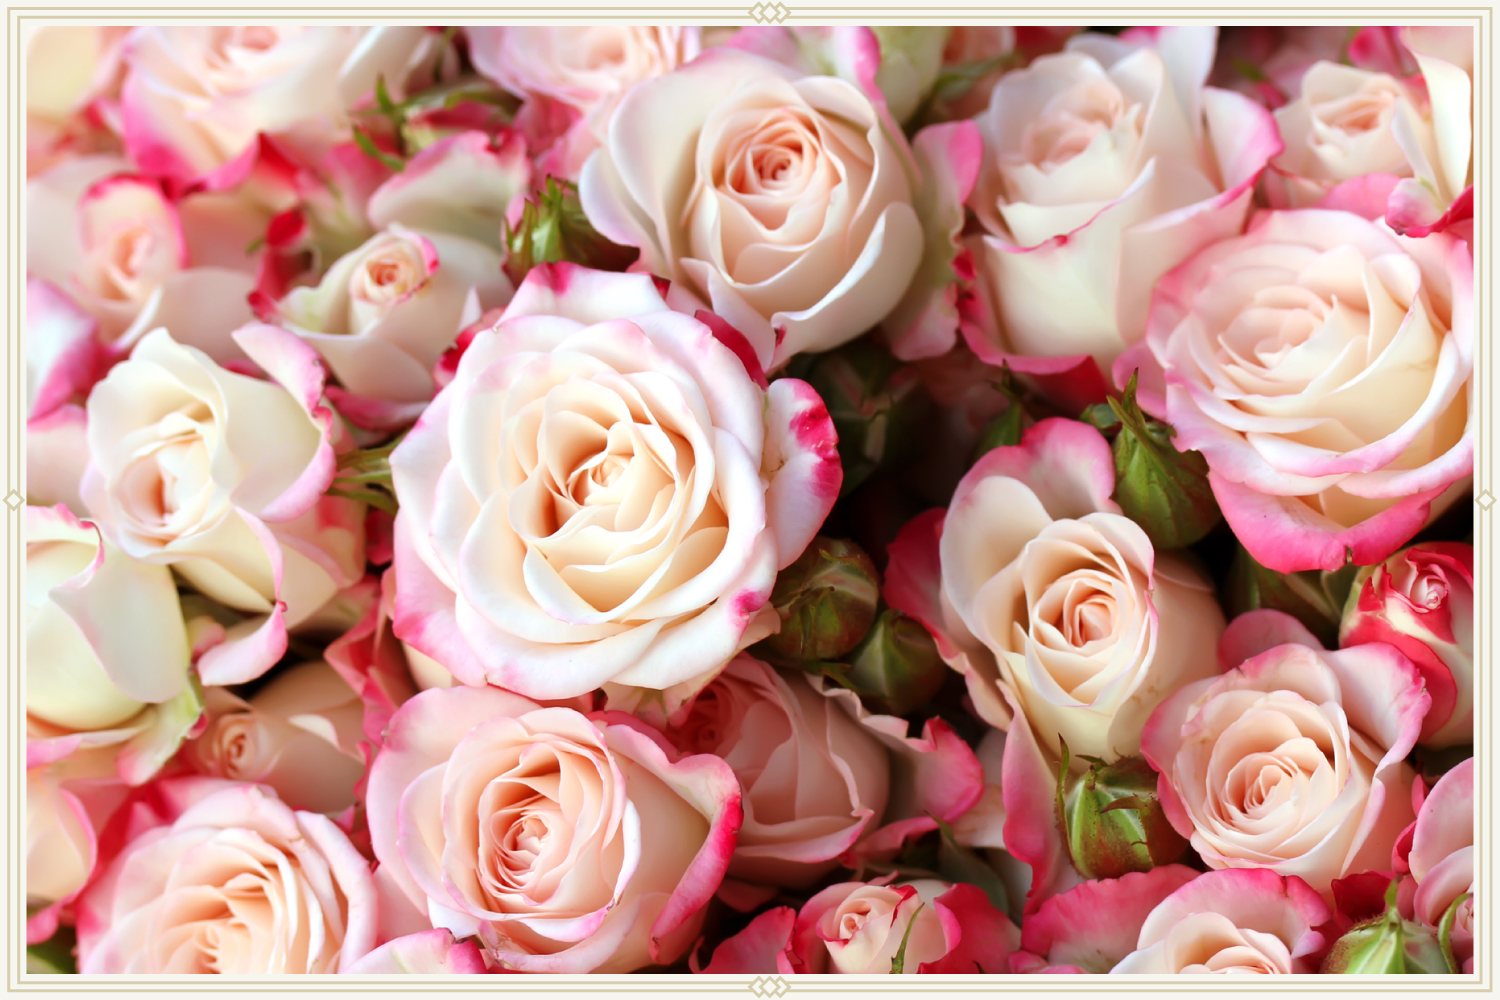 22 Rose Color Meanings: What Does Each Shade Symbolize? - Color Meanings